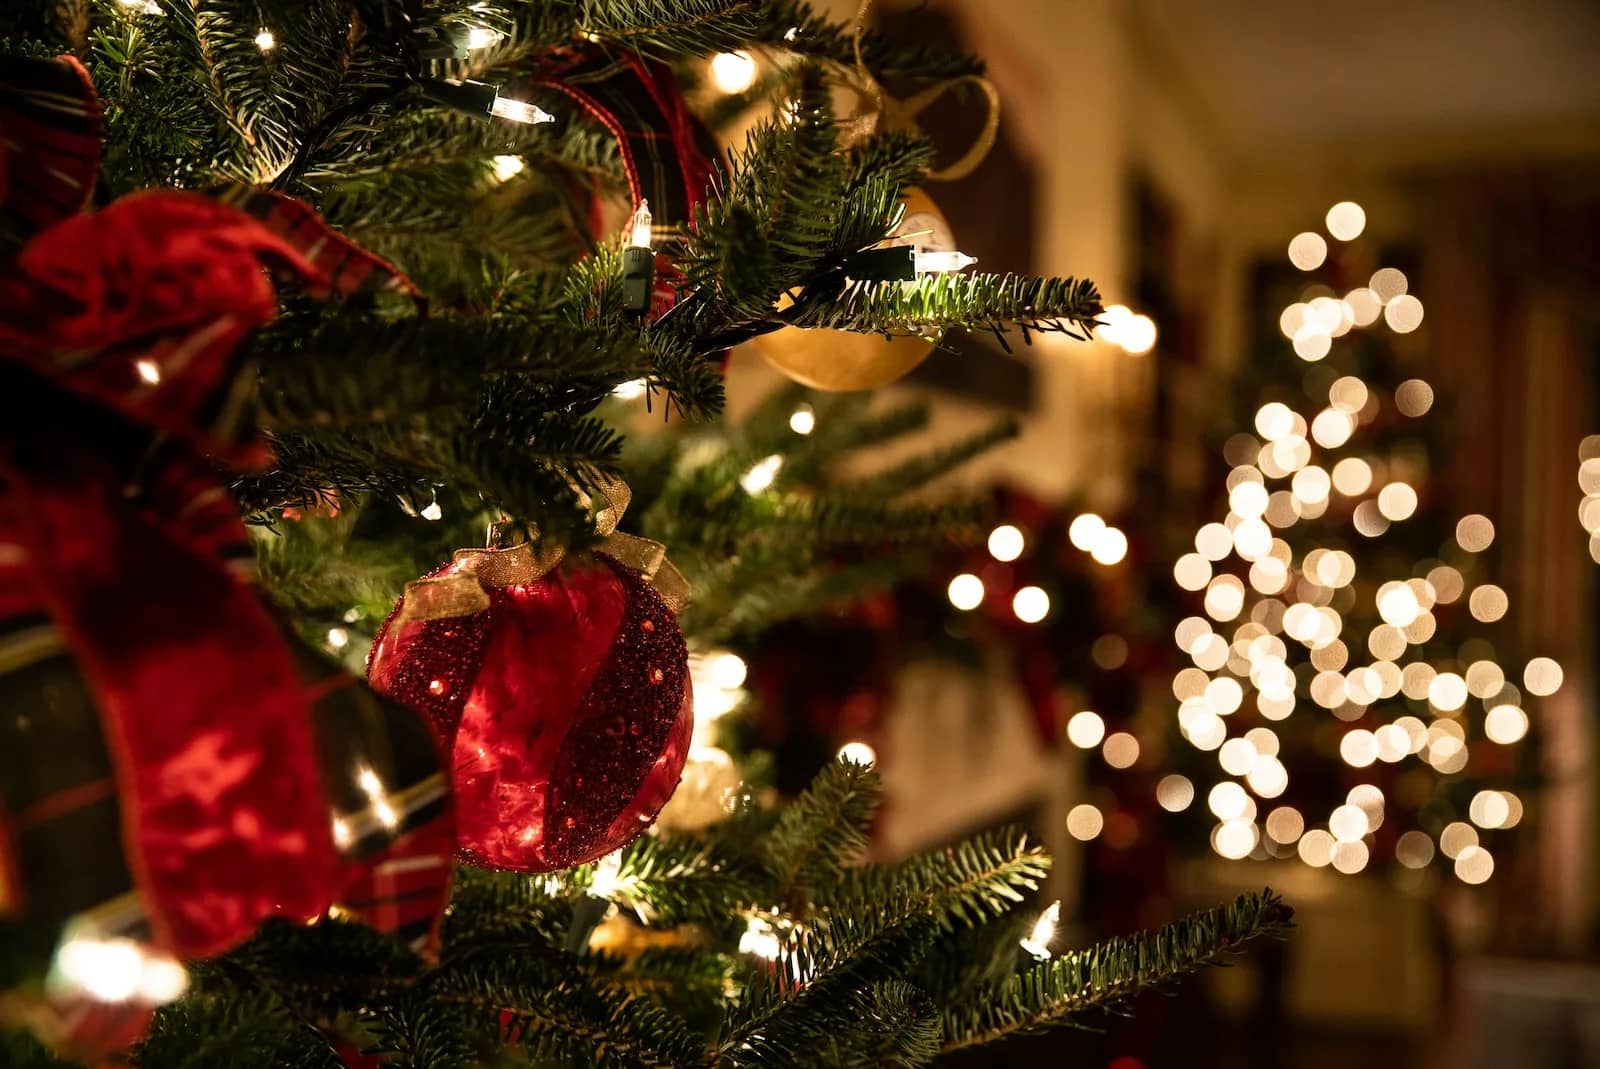 10 Christmas Playlists for a Festive Holiday